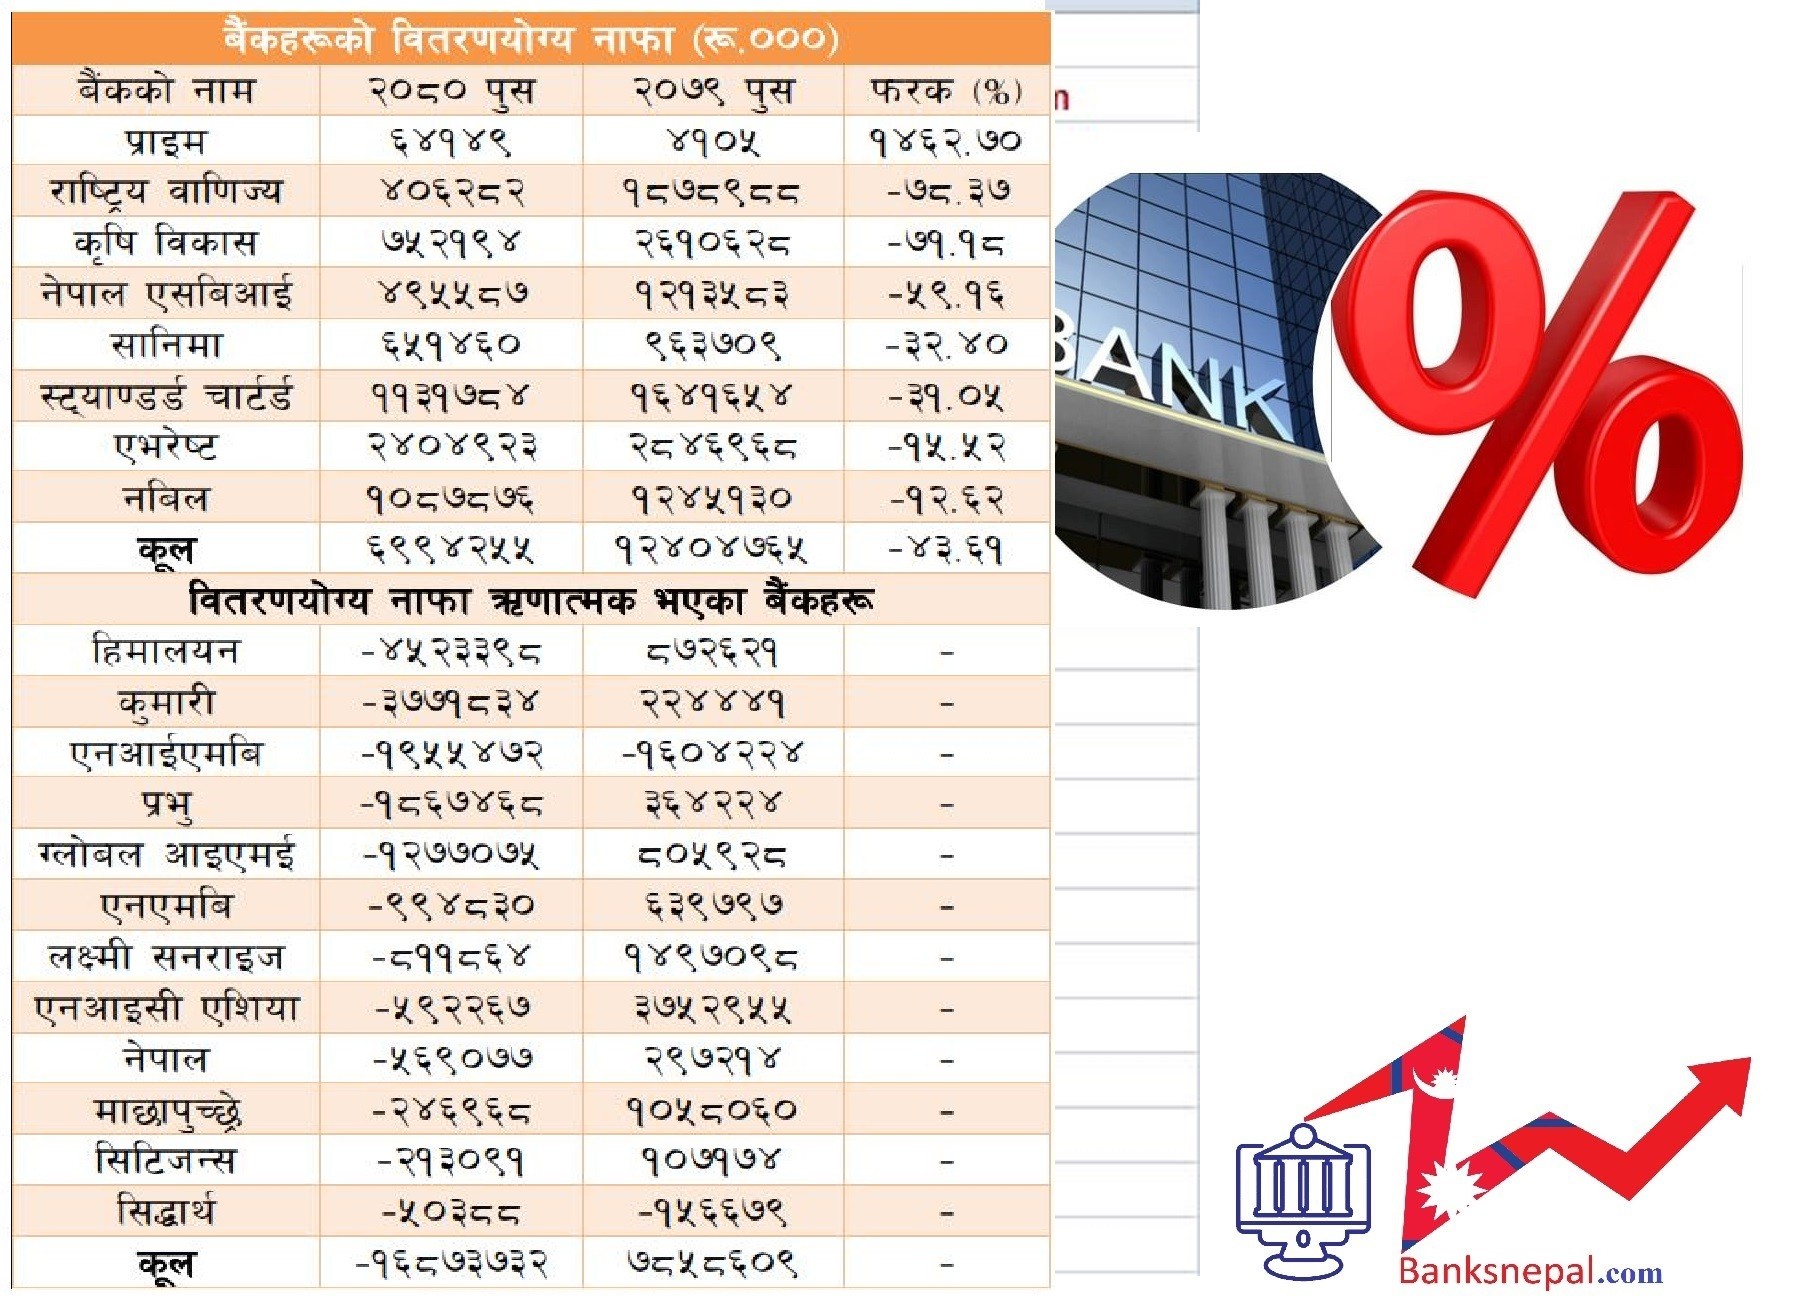 Top 12 commercial banks of Nepal distributable profit is negative